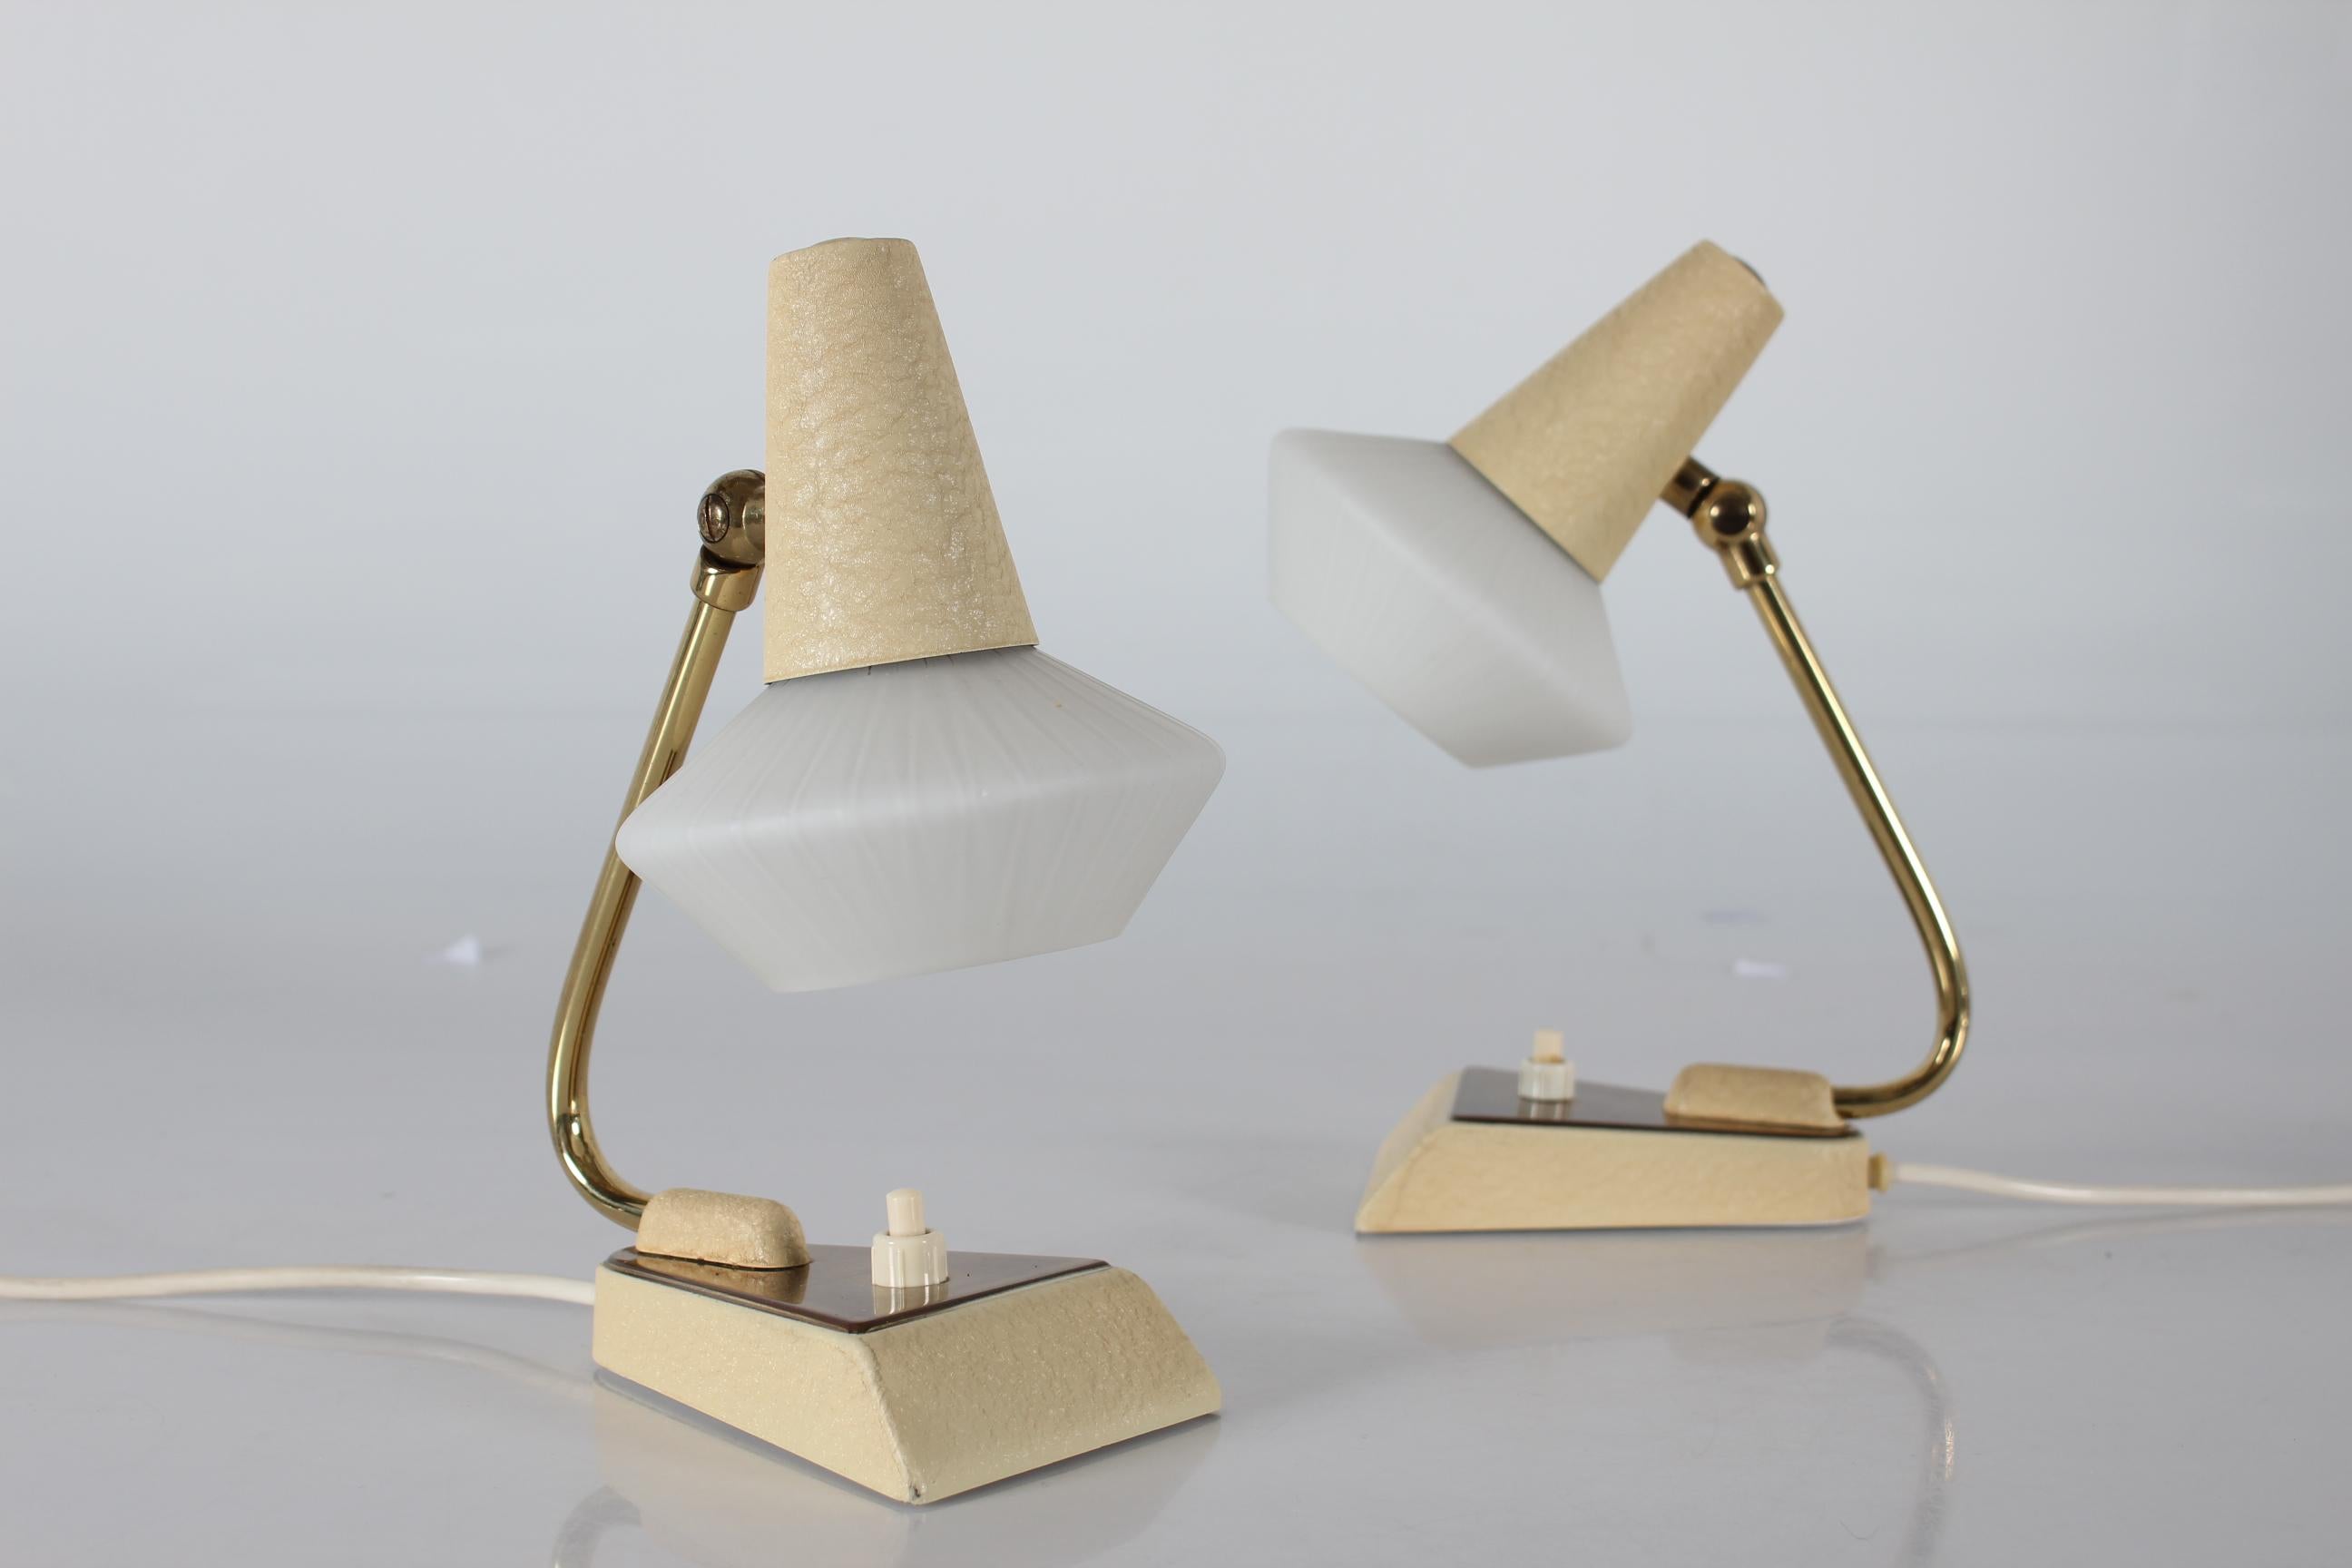 Pair of European probably German bedside table lamps in the style of Stilnovo.
The small lamps have a triangular base with brass lid and a built-in switch.
The metal parts have a slight embossed pattern with cream colored lacquer. The adjustable